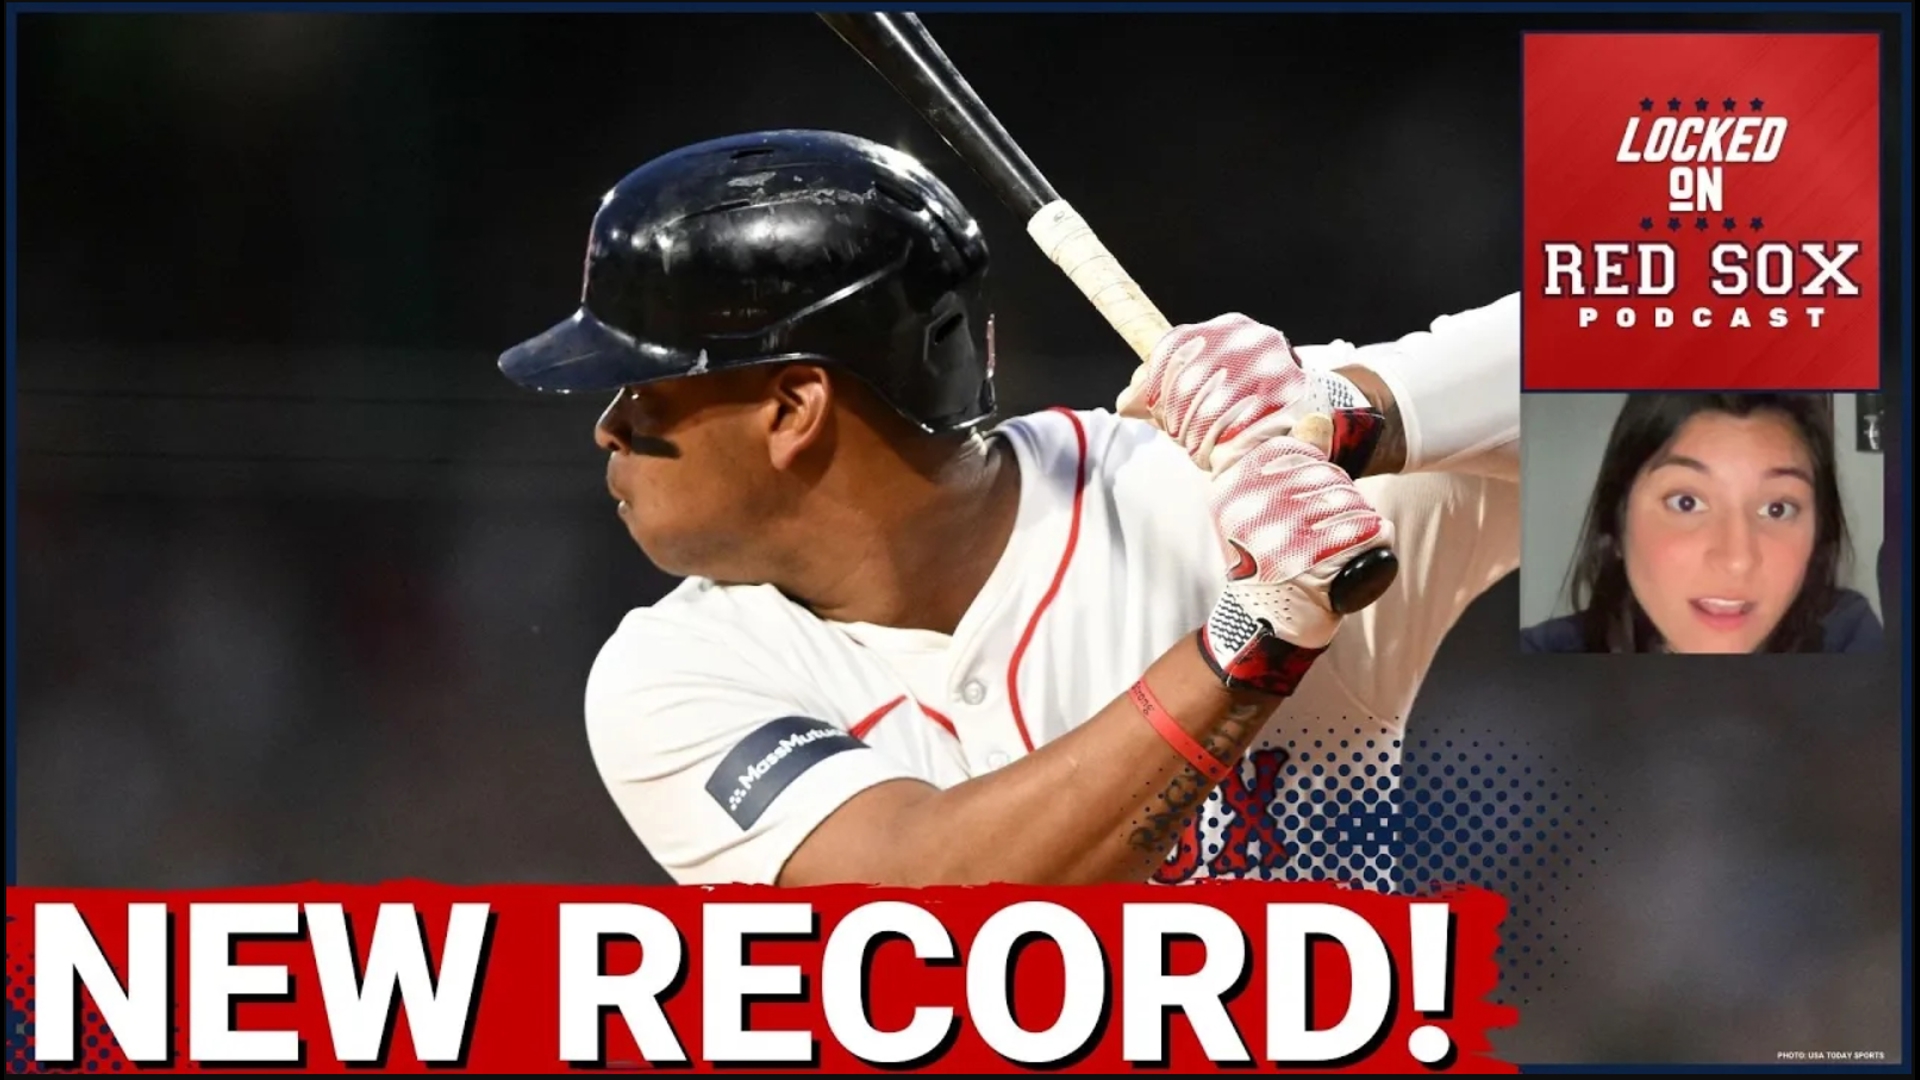 Rafael Devers did it again! He hit a home run in his sixth consecutive game to claim the Boston Red Sox franchise record.